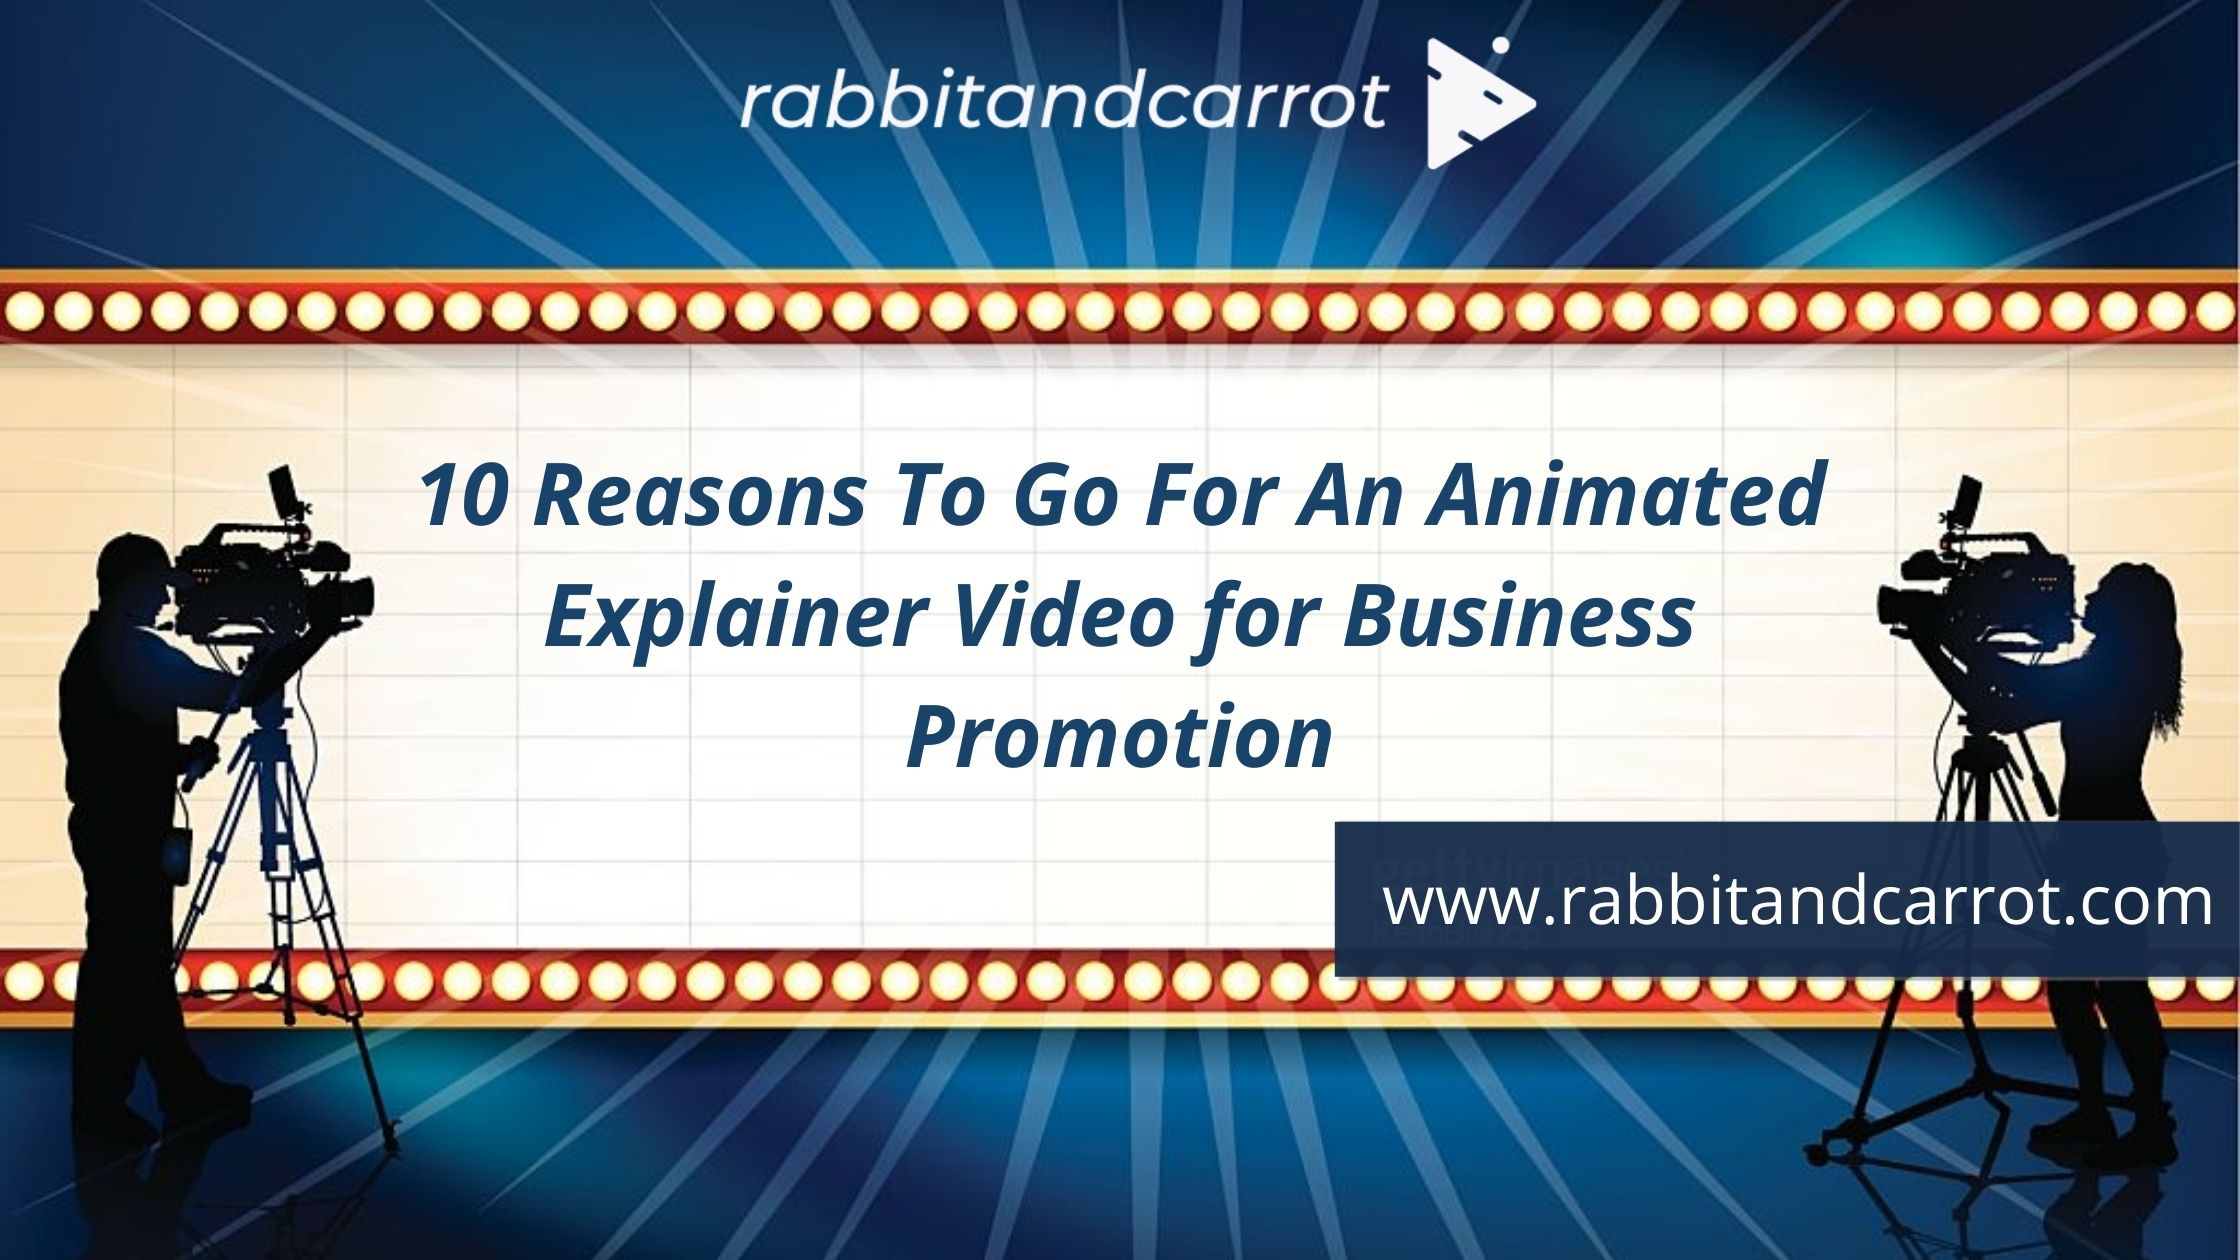 10 Reasons to Go For an Animated Explainer Video for Business Promotion